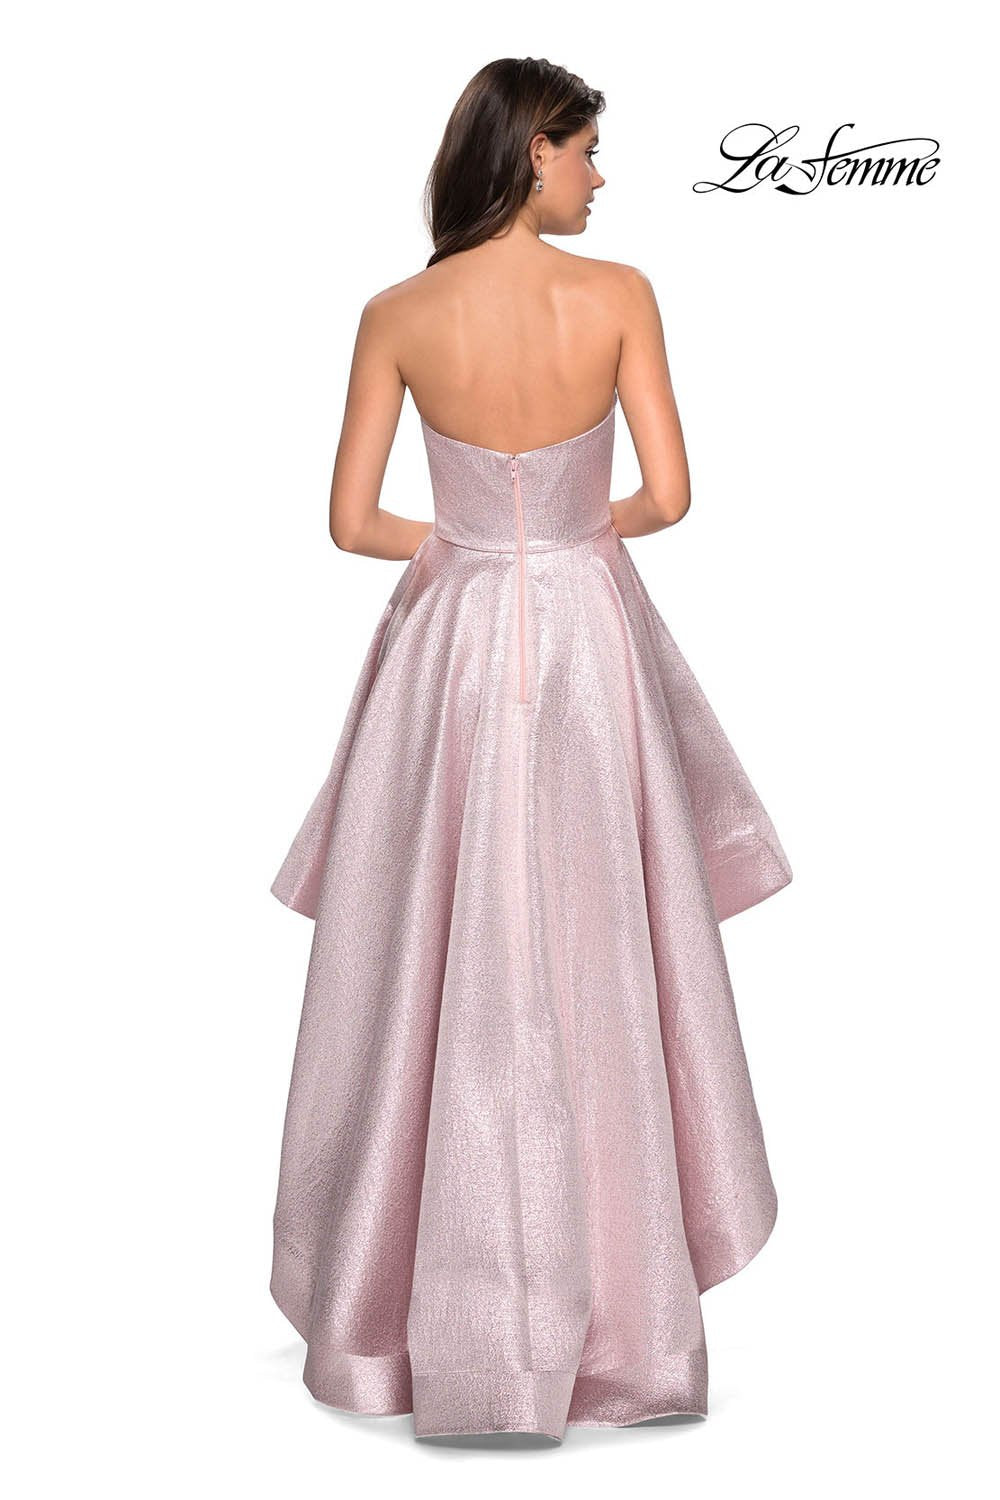 La Femme 27783 dress images in these colors: Pink.